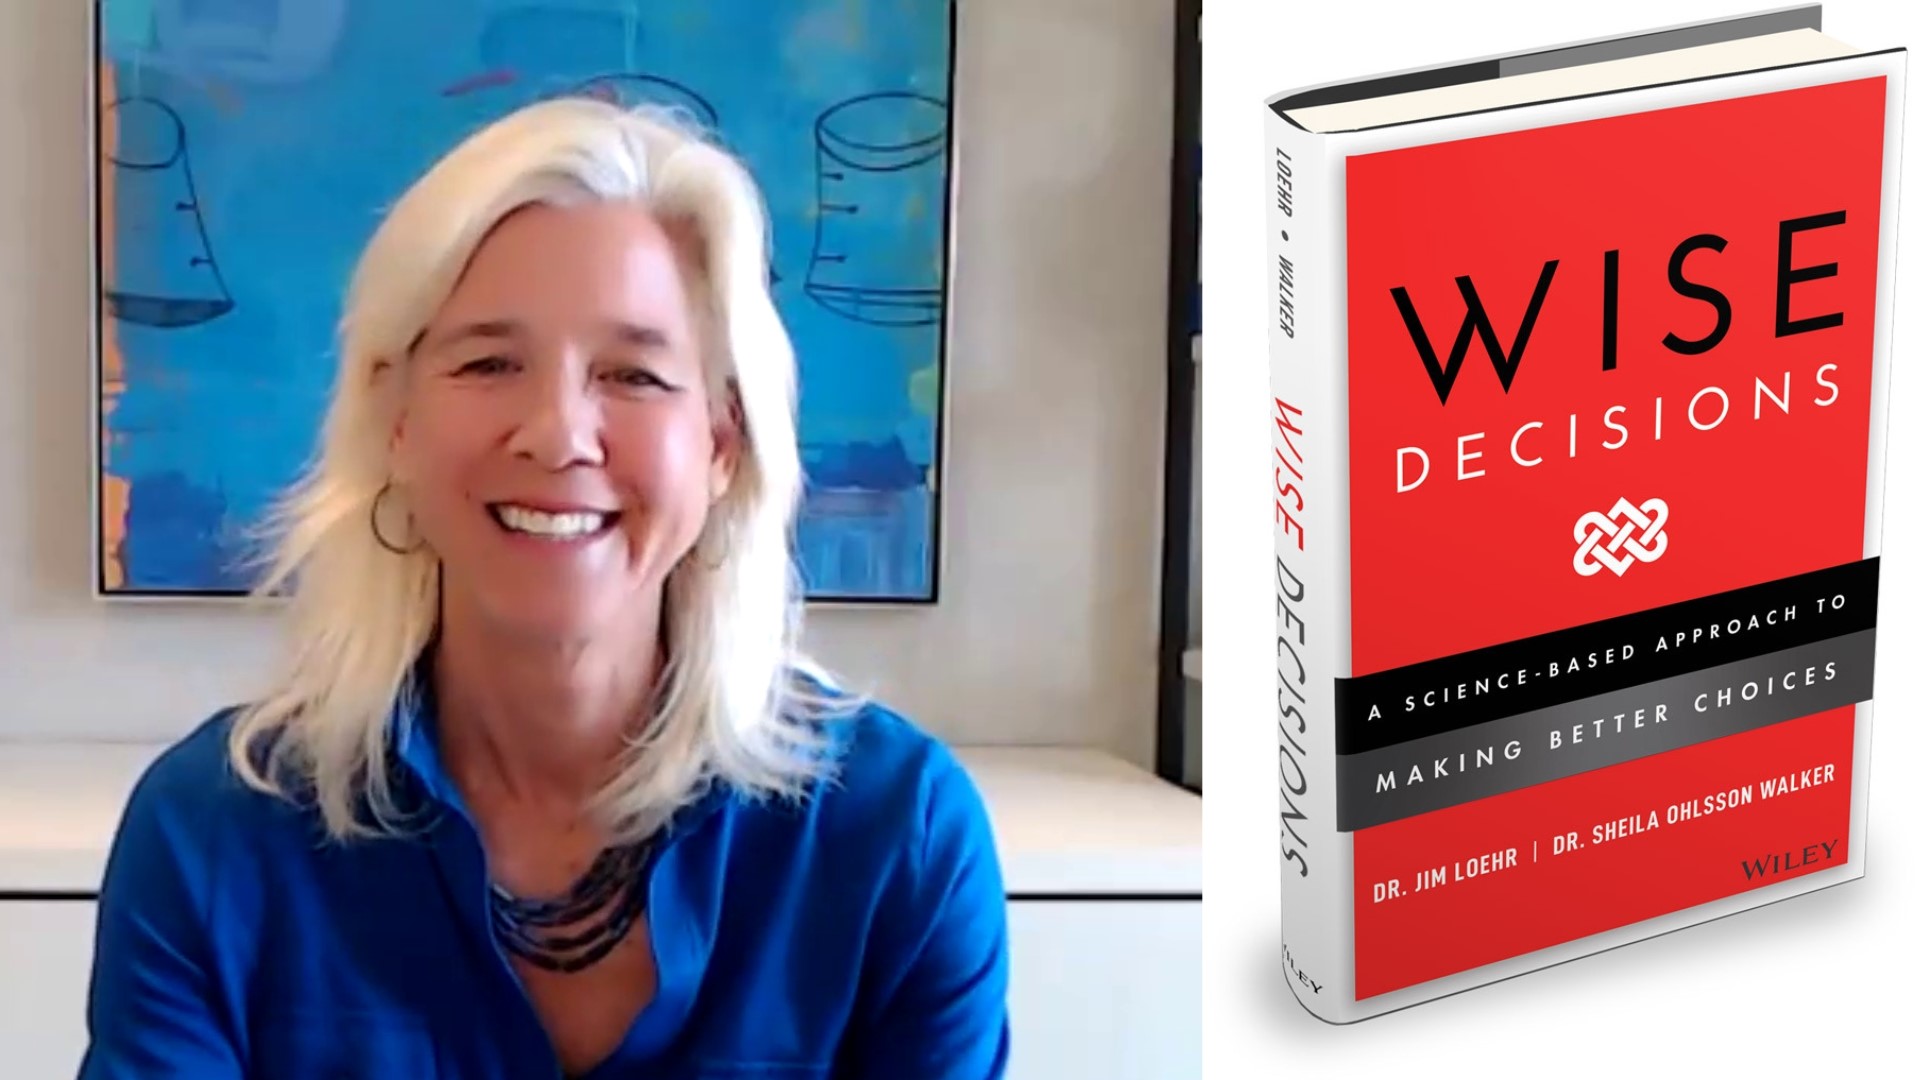 Dr. Sheila Ohlsson Walker, author of "Wise Decisions," shares the concept of Your Own Decision Advisor (YODA), the inner voice that guide's people's choices. #newday